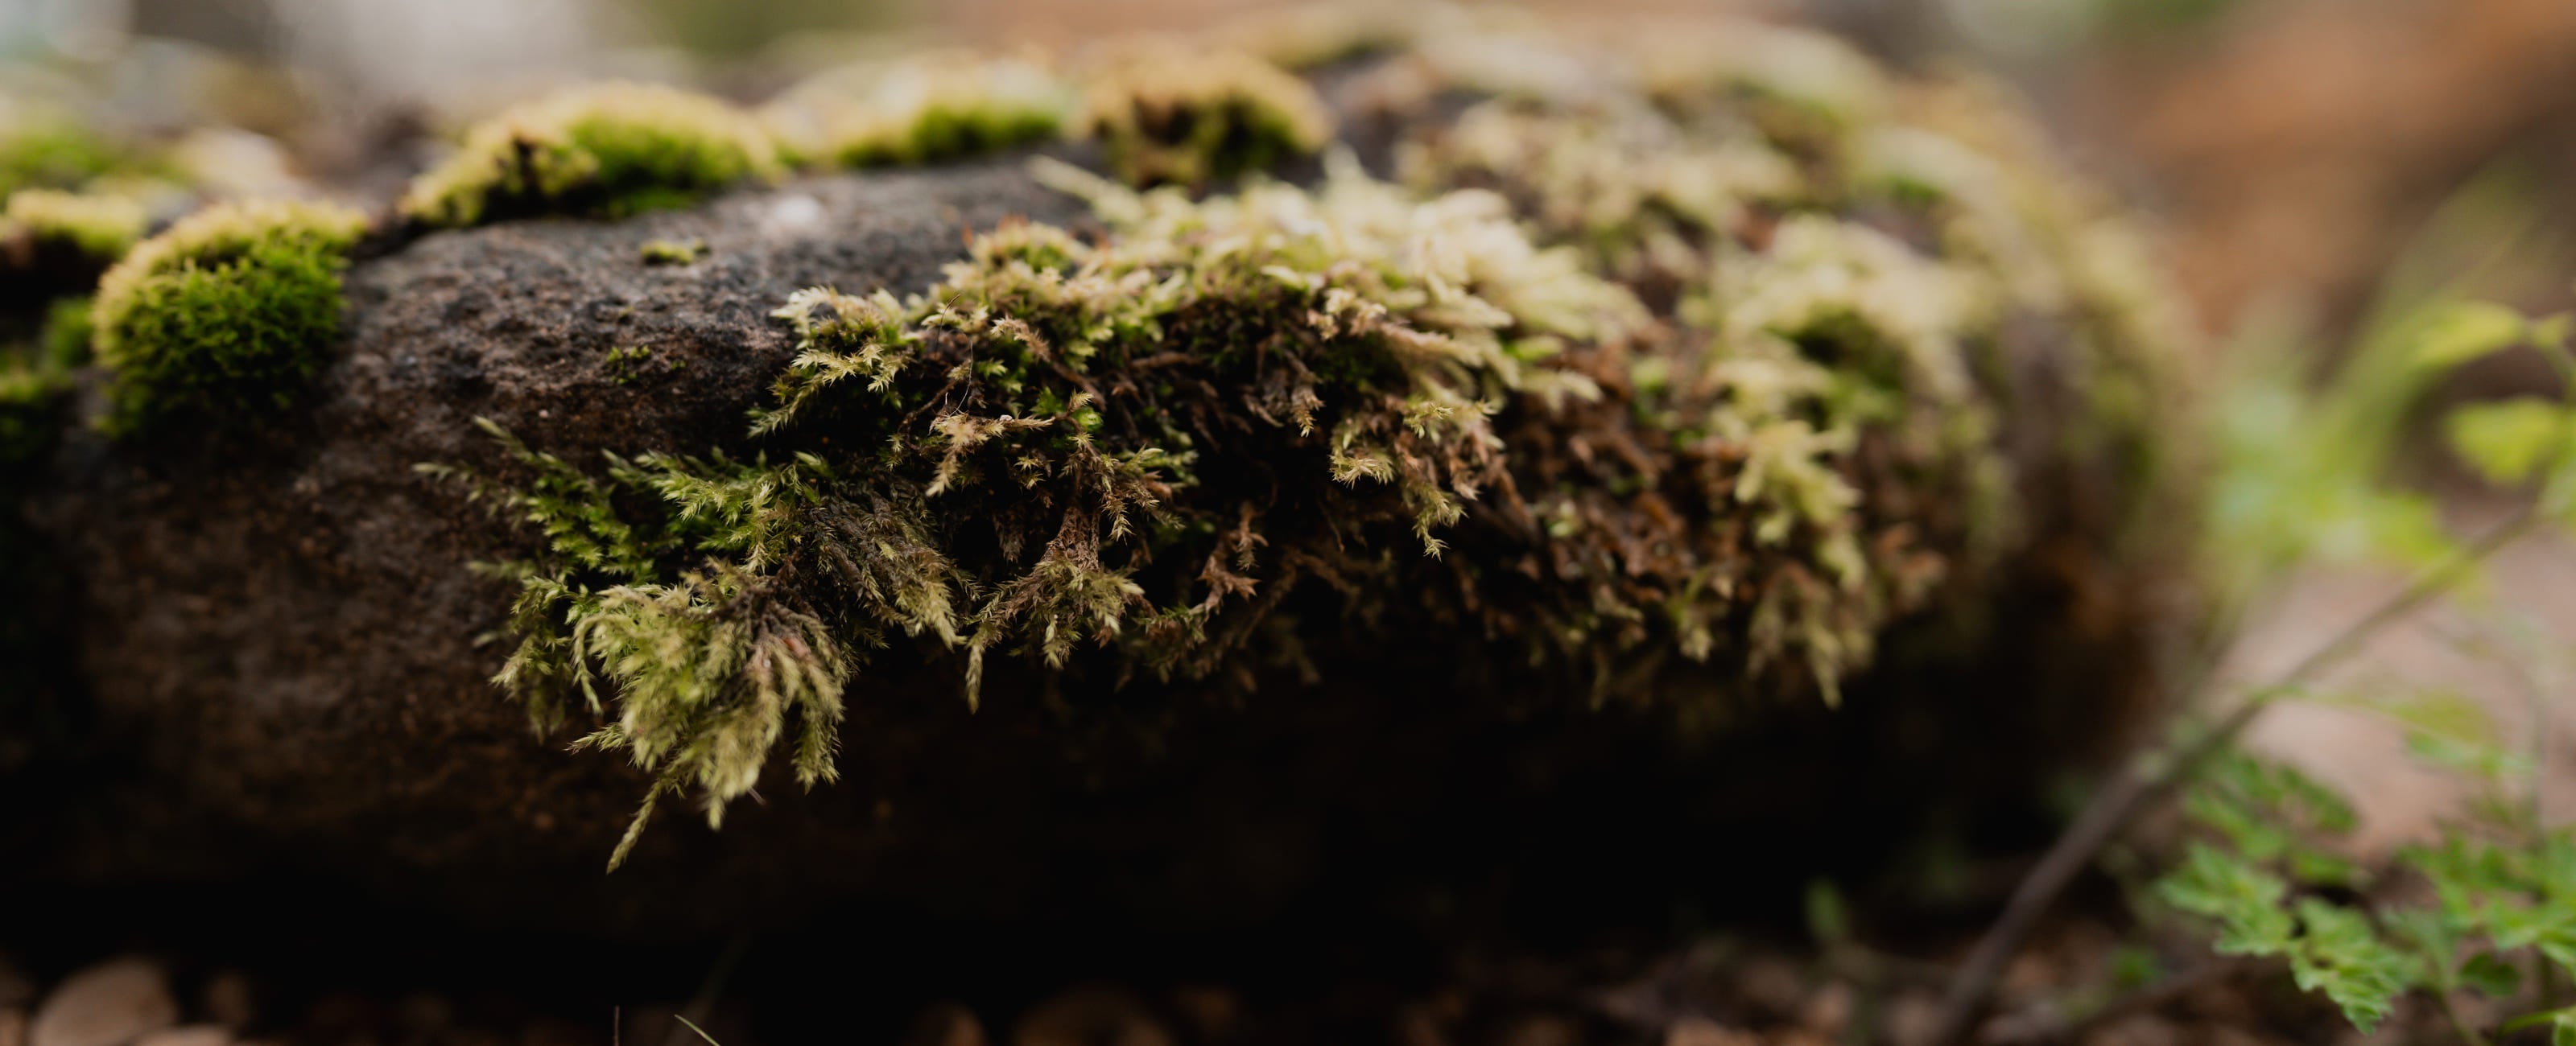 close up of a mossy rock